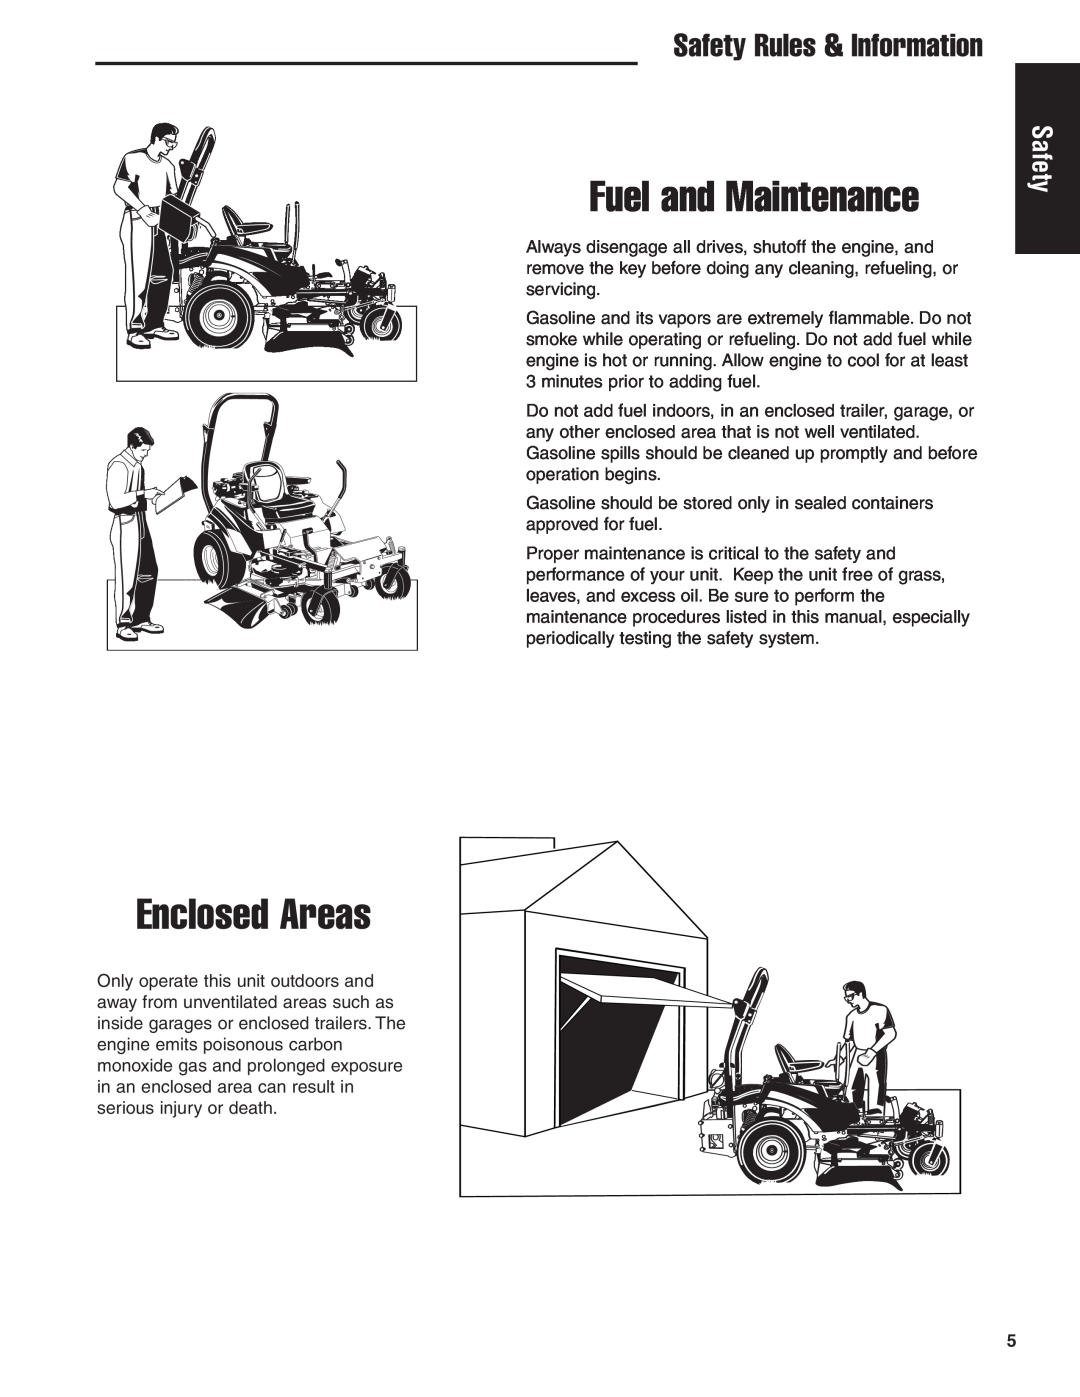 Ferris Industries 5901181, 5901180, 5901178, 5901179 manual Fuel and Maintenance, Enclosed Areas, Safety Rules & Information 